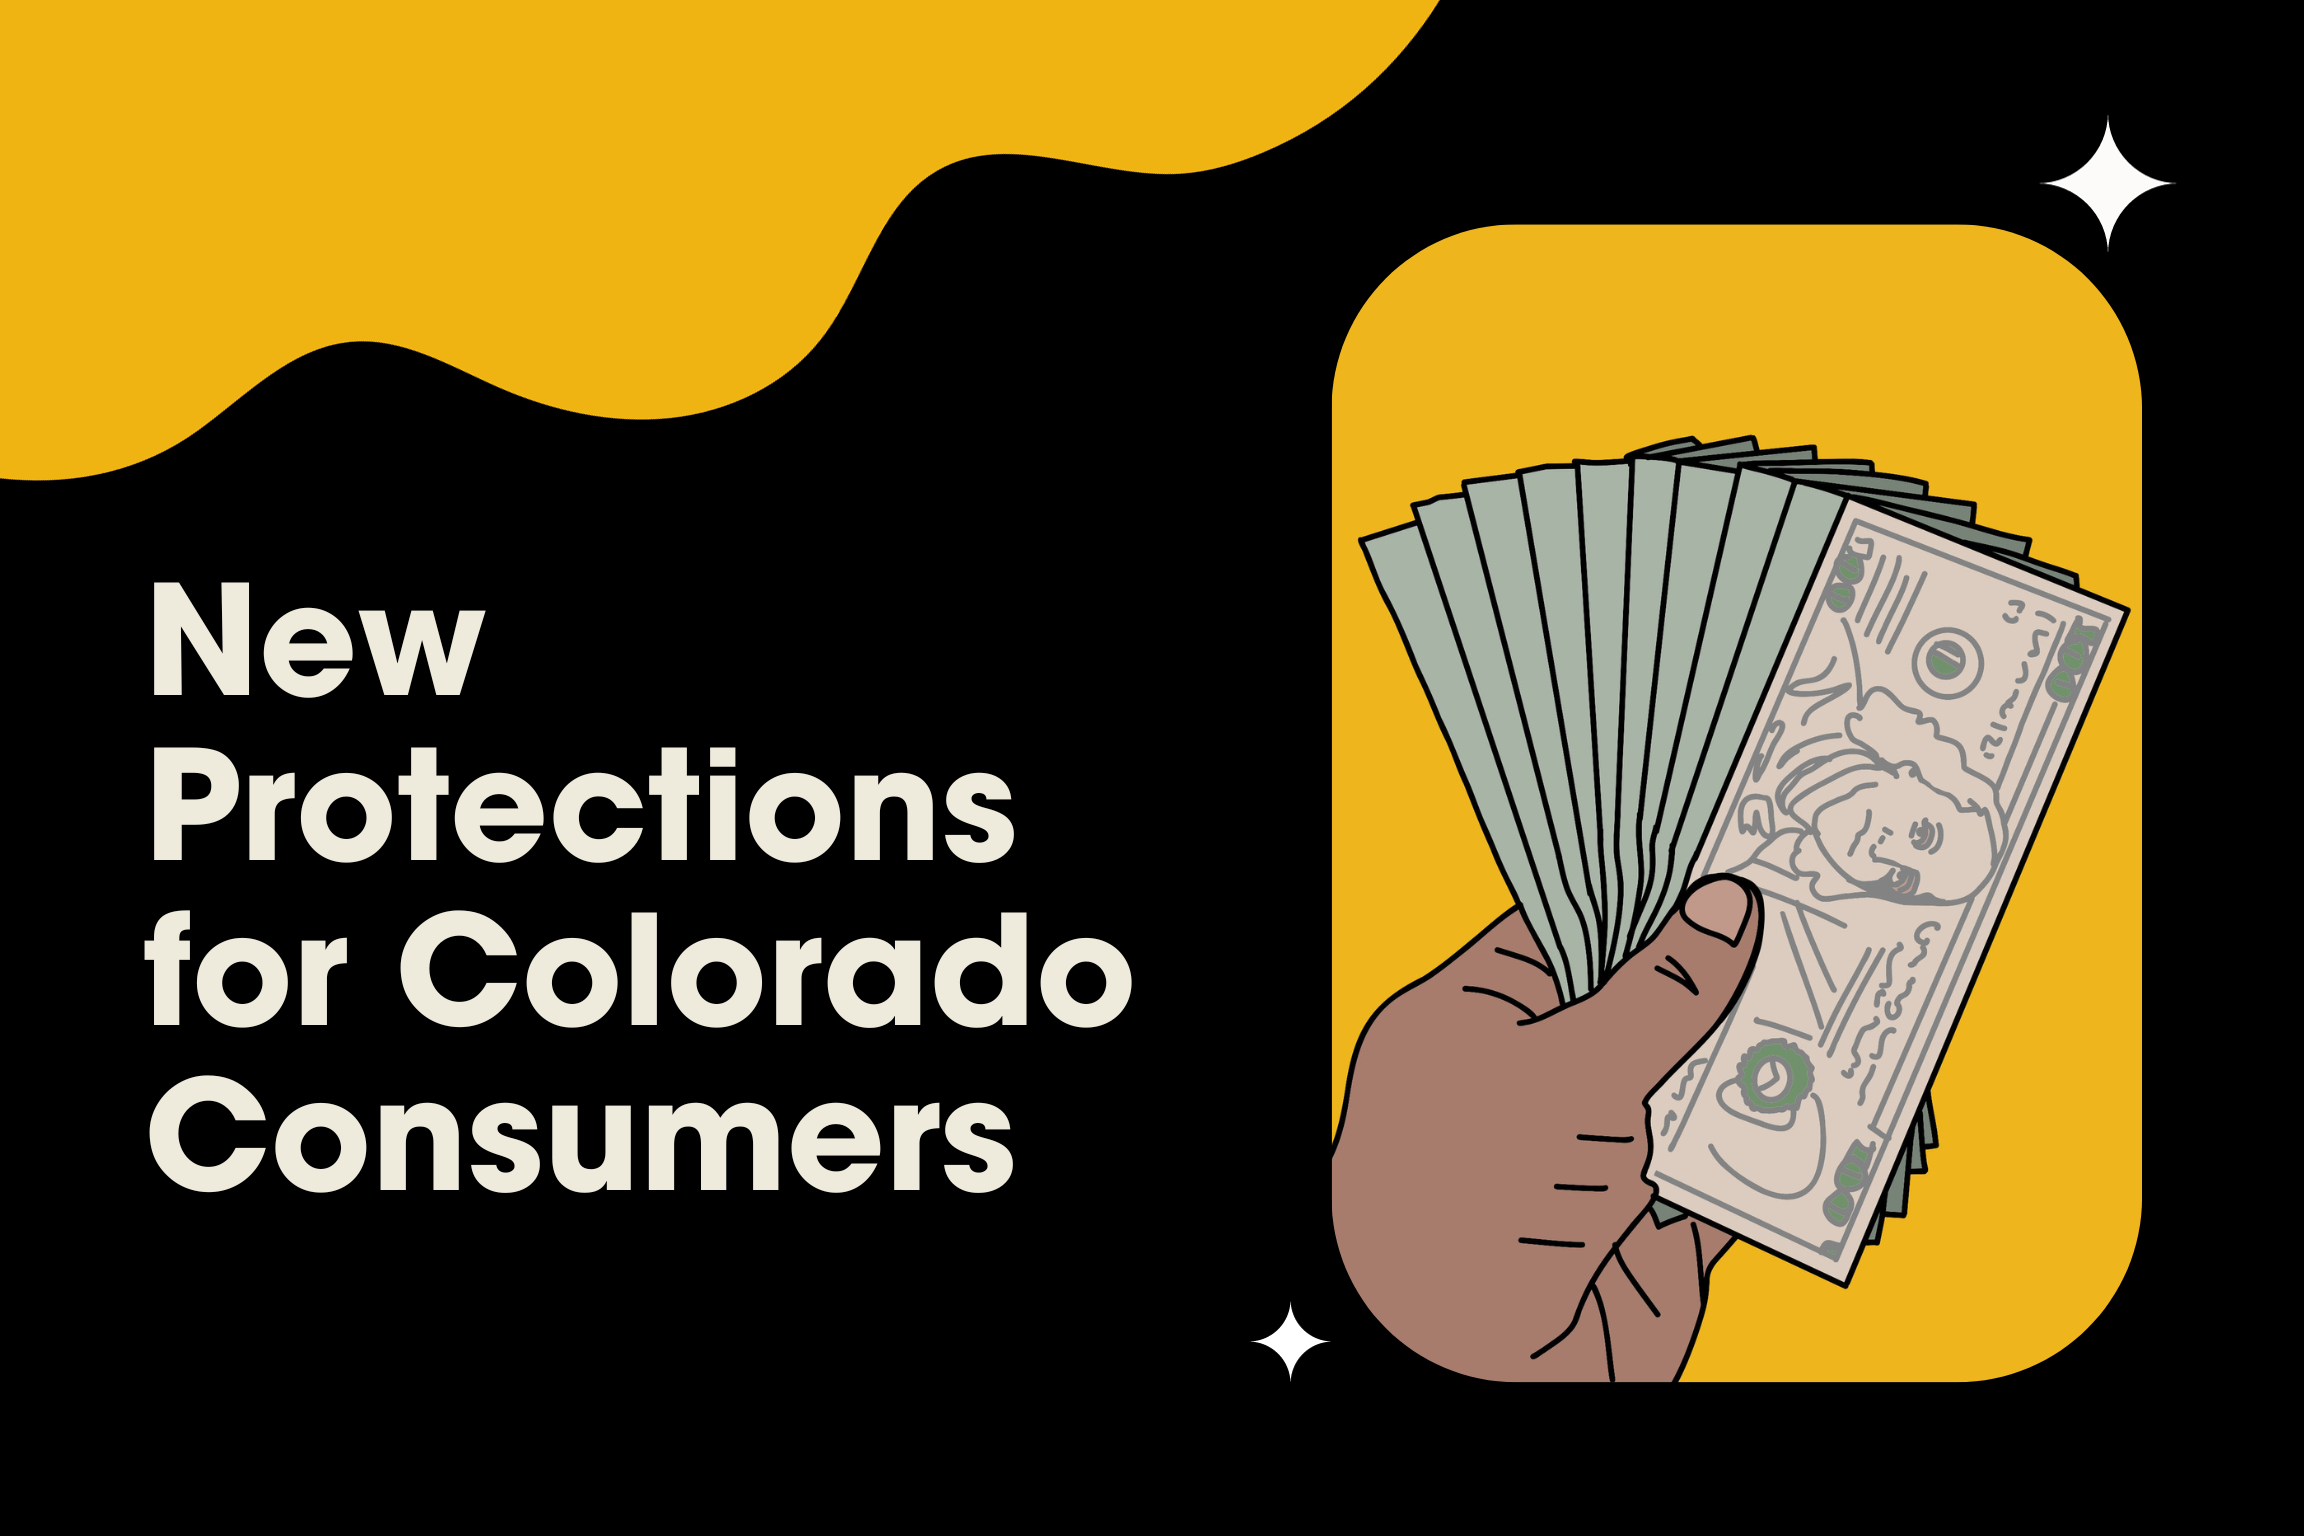 Illustration of a hand holding cash with text "New Protections for Colorado Consumers" on a yellow and black background.